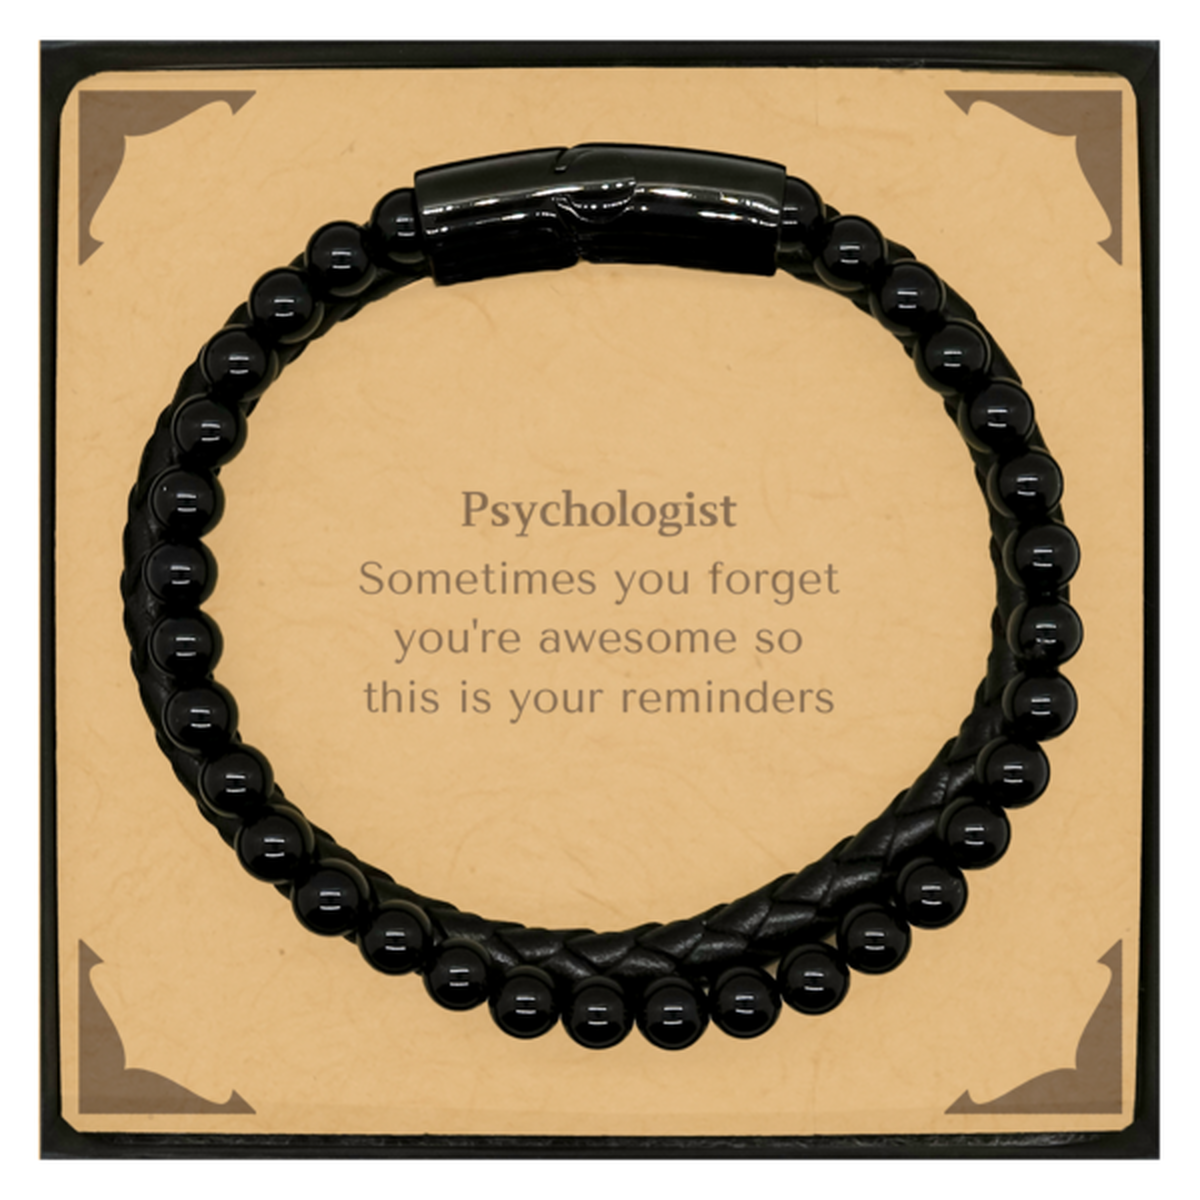 Sentimental Psychologist Stone Leather Bracelets, Psychologist Sometimes you forget you're awesome so this is your reminders, Graduation Christmas Birthday Gifts for Psychologist, Men, Women, Coworkers